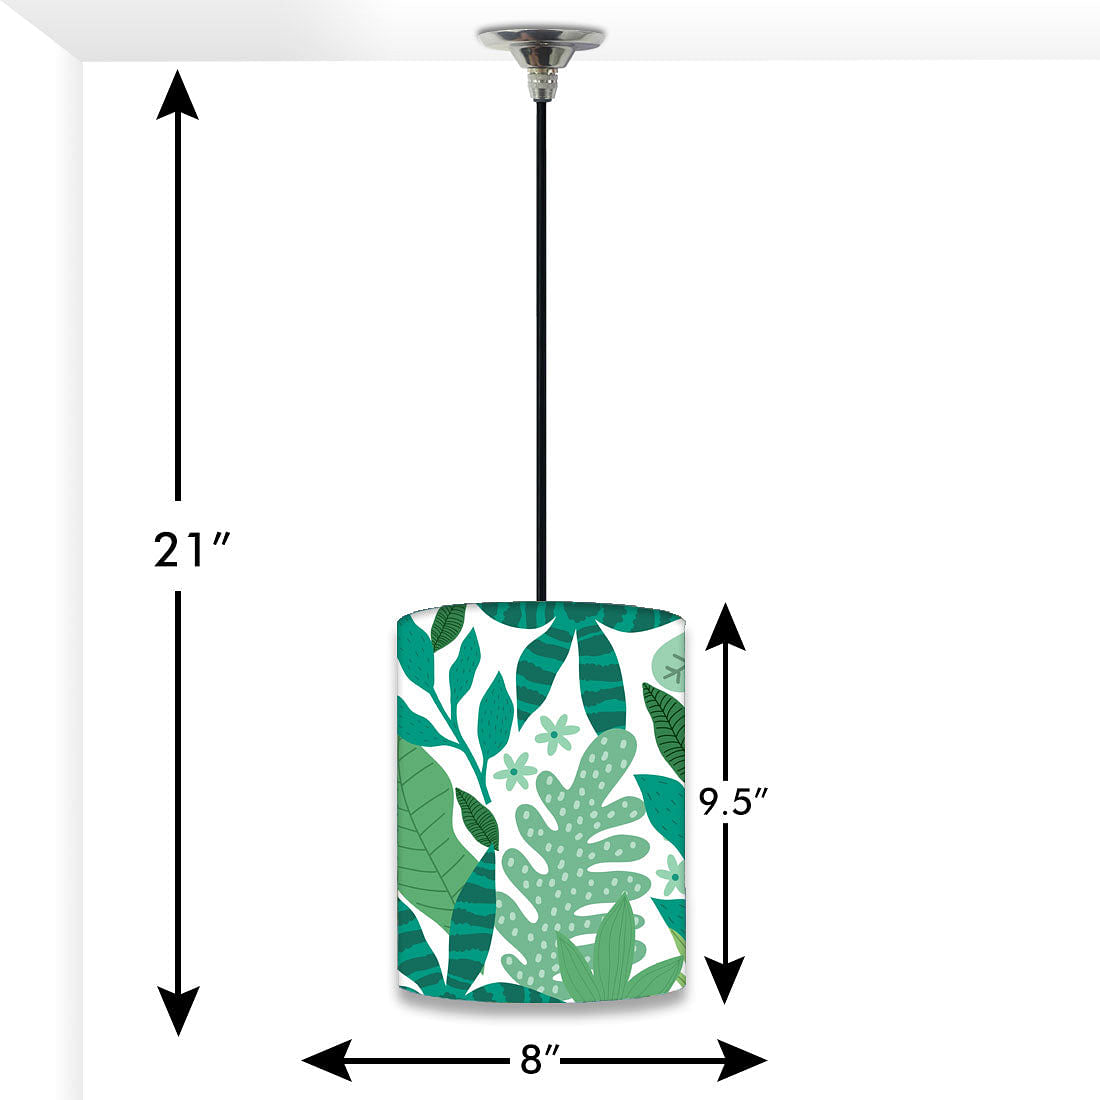 Pendant Lamp for Passage - Tropical Trending Vibes 0056 Nutcase